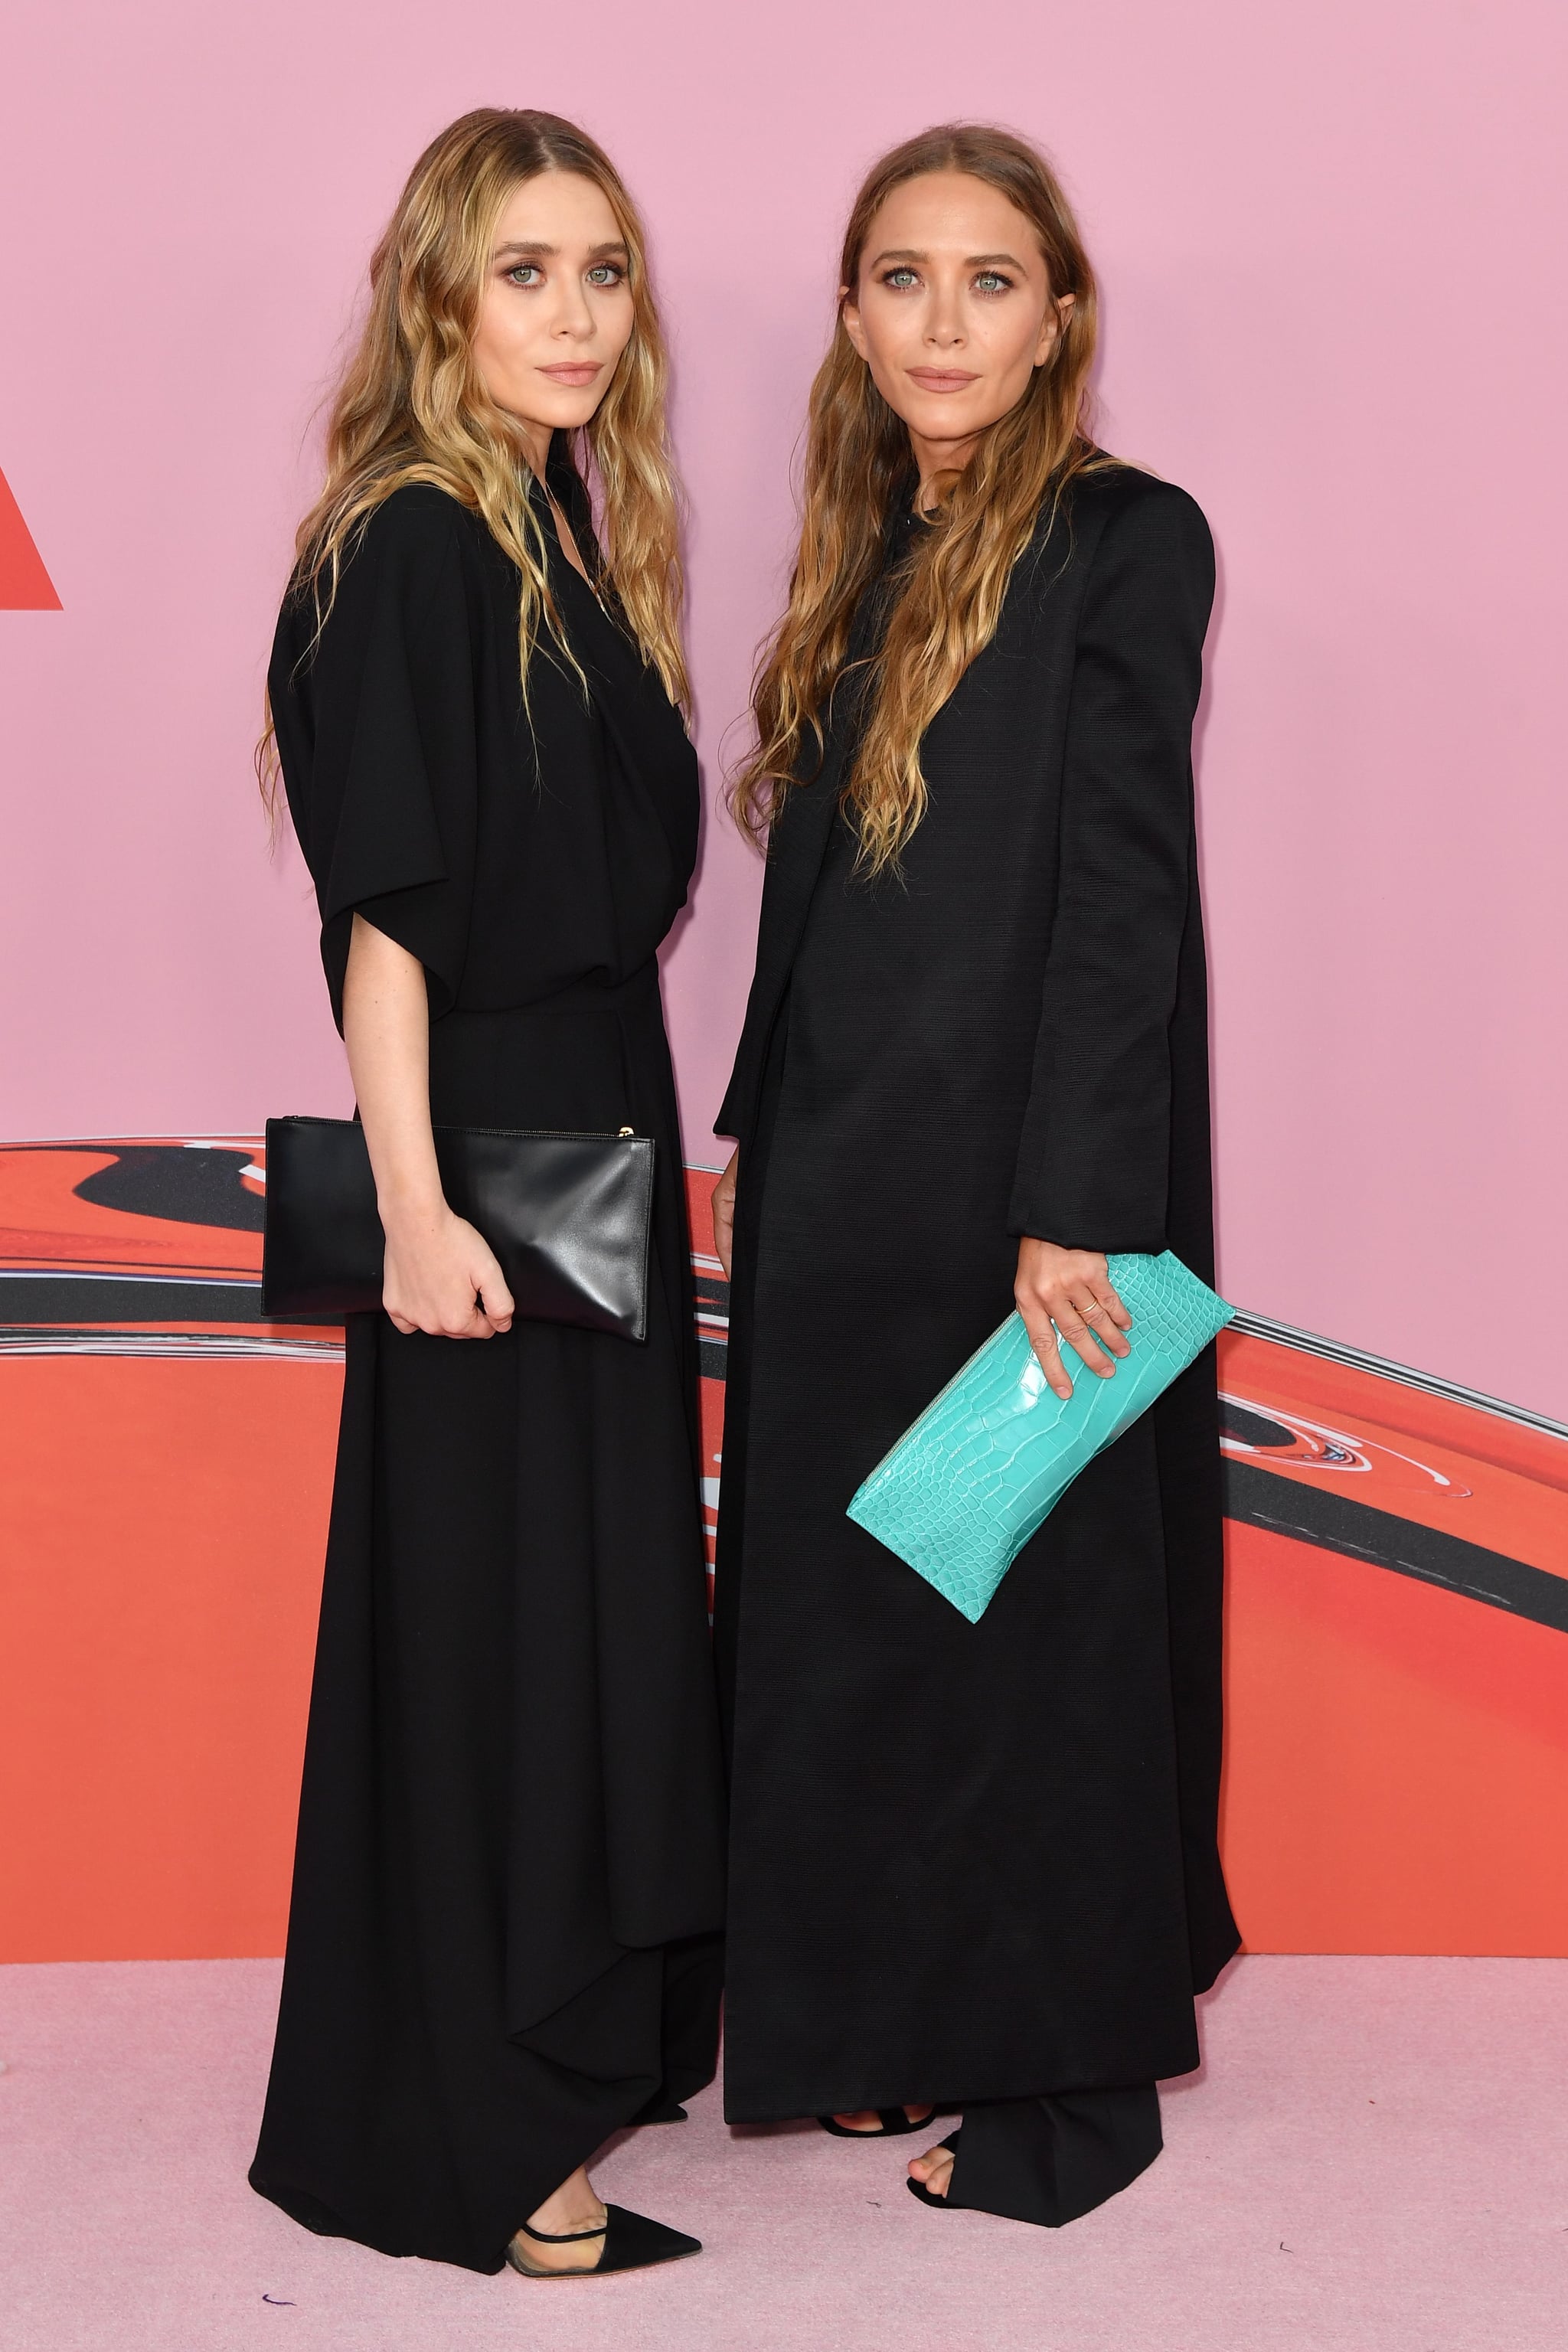 Designers Ashley Olsen and Christian Louboutin attend Louis Vuitton News  Photo - Getty Images